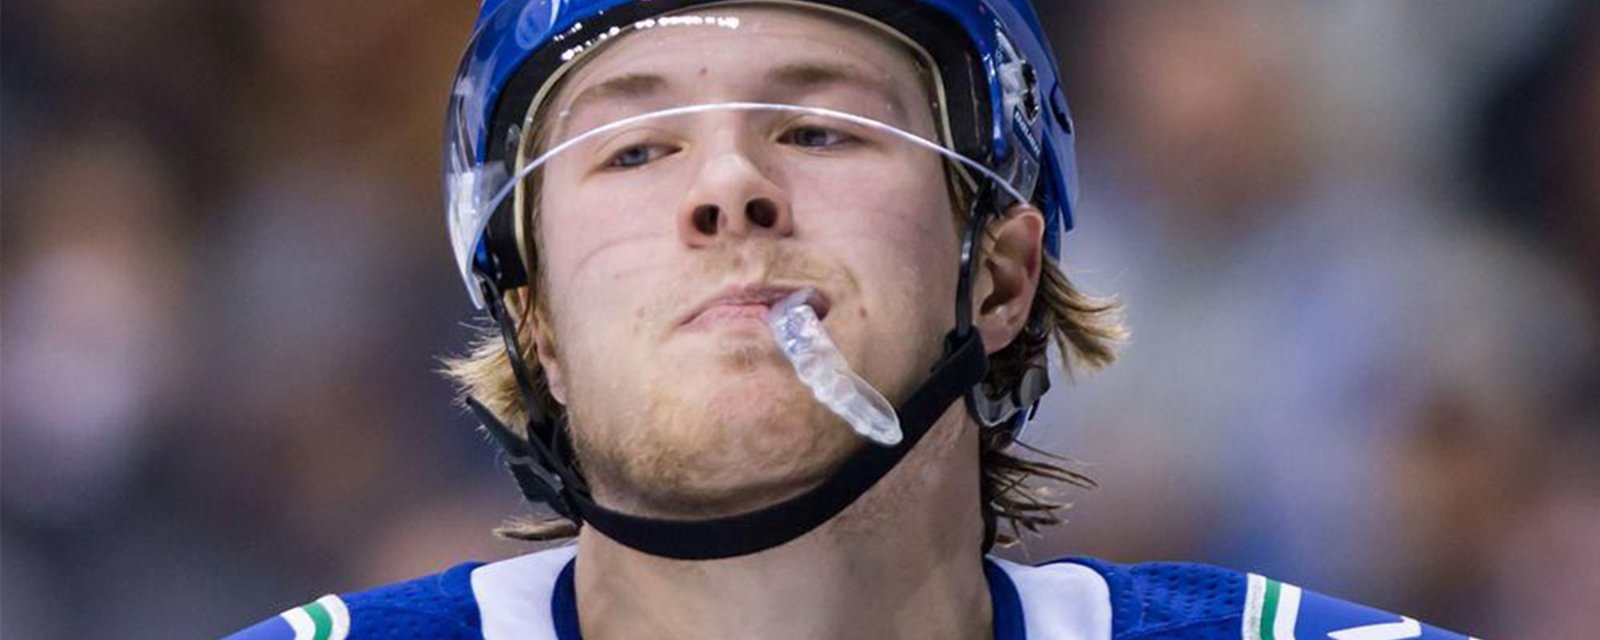 Breaking: Injury forces Boeser to leave Canucks